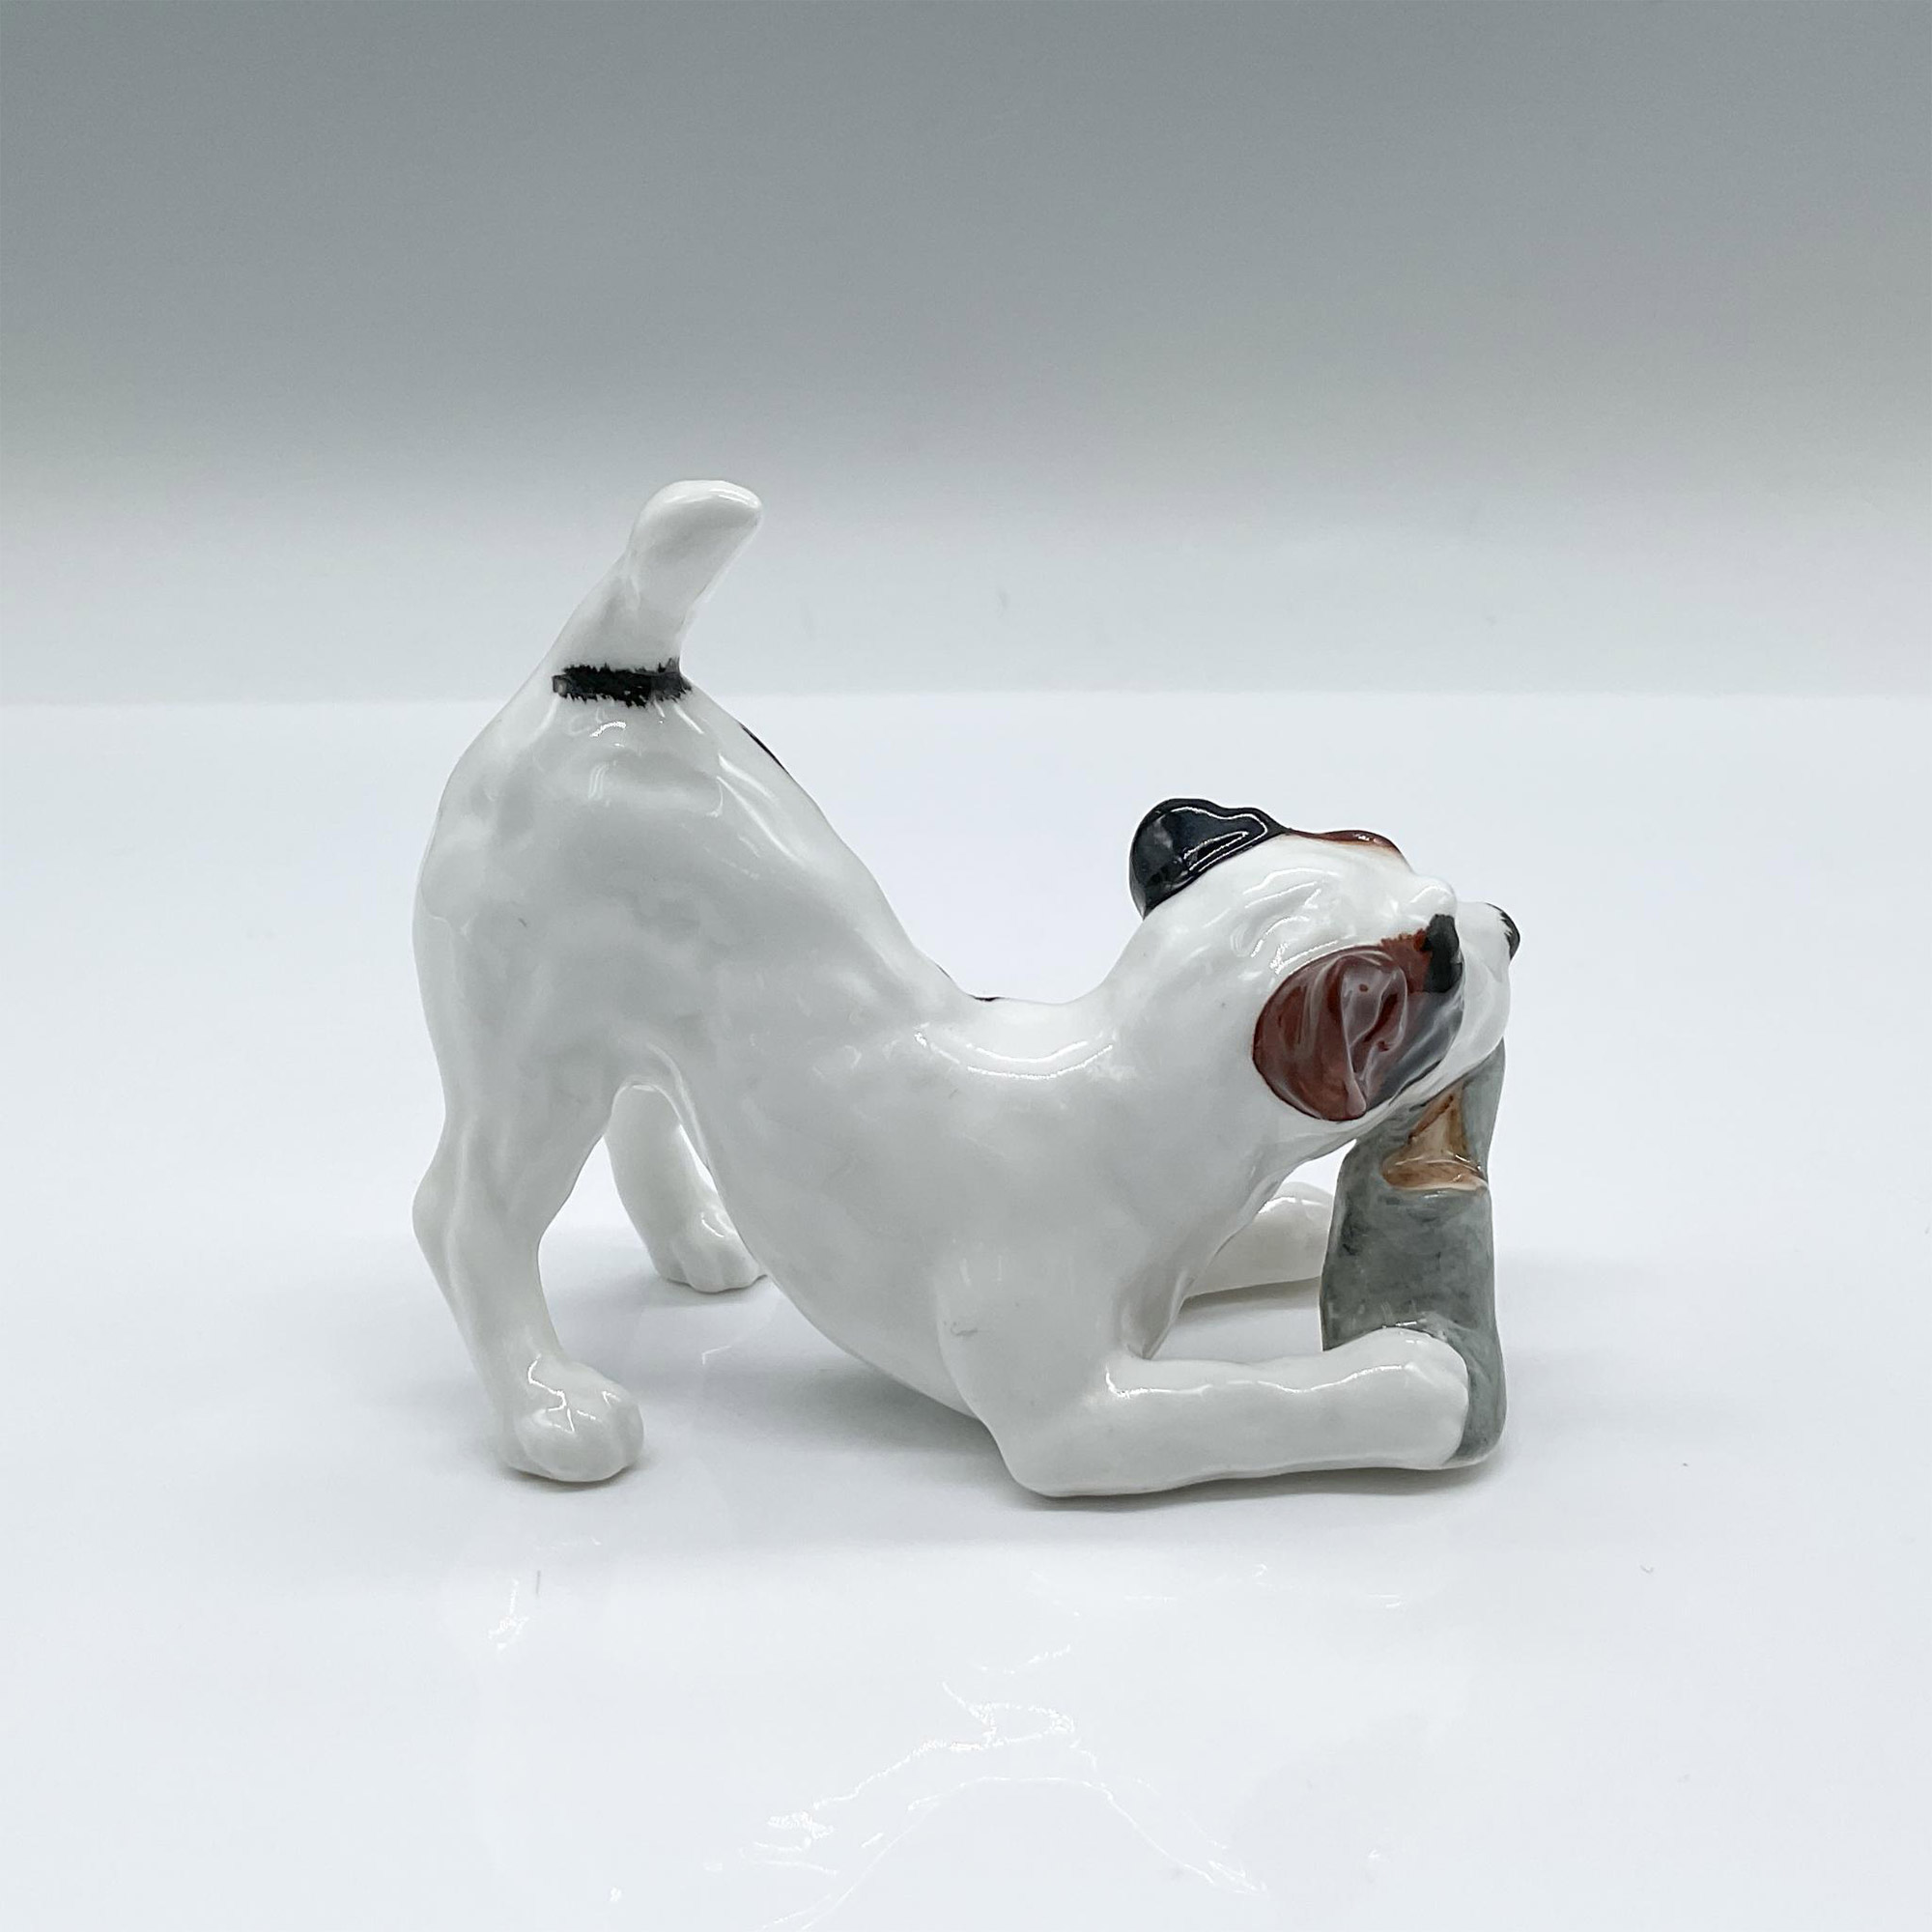 Rare Character Dog with Slipper - HN2654 - Royal Doulton Animal Figurine - Image 2 of 3